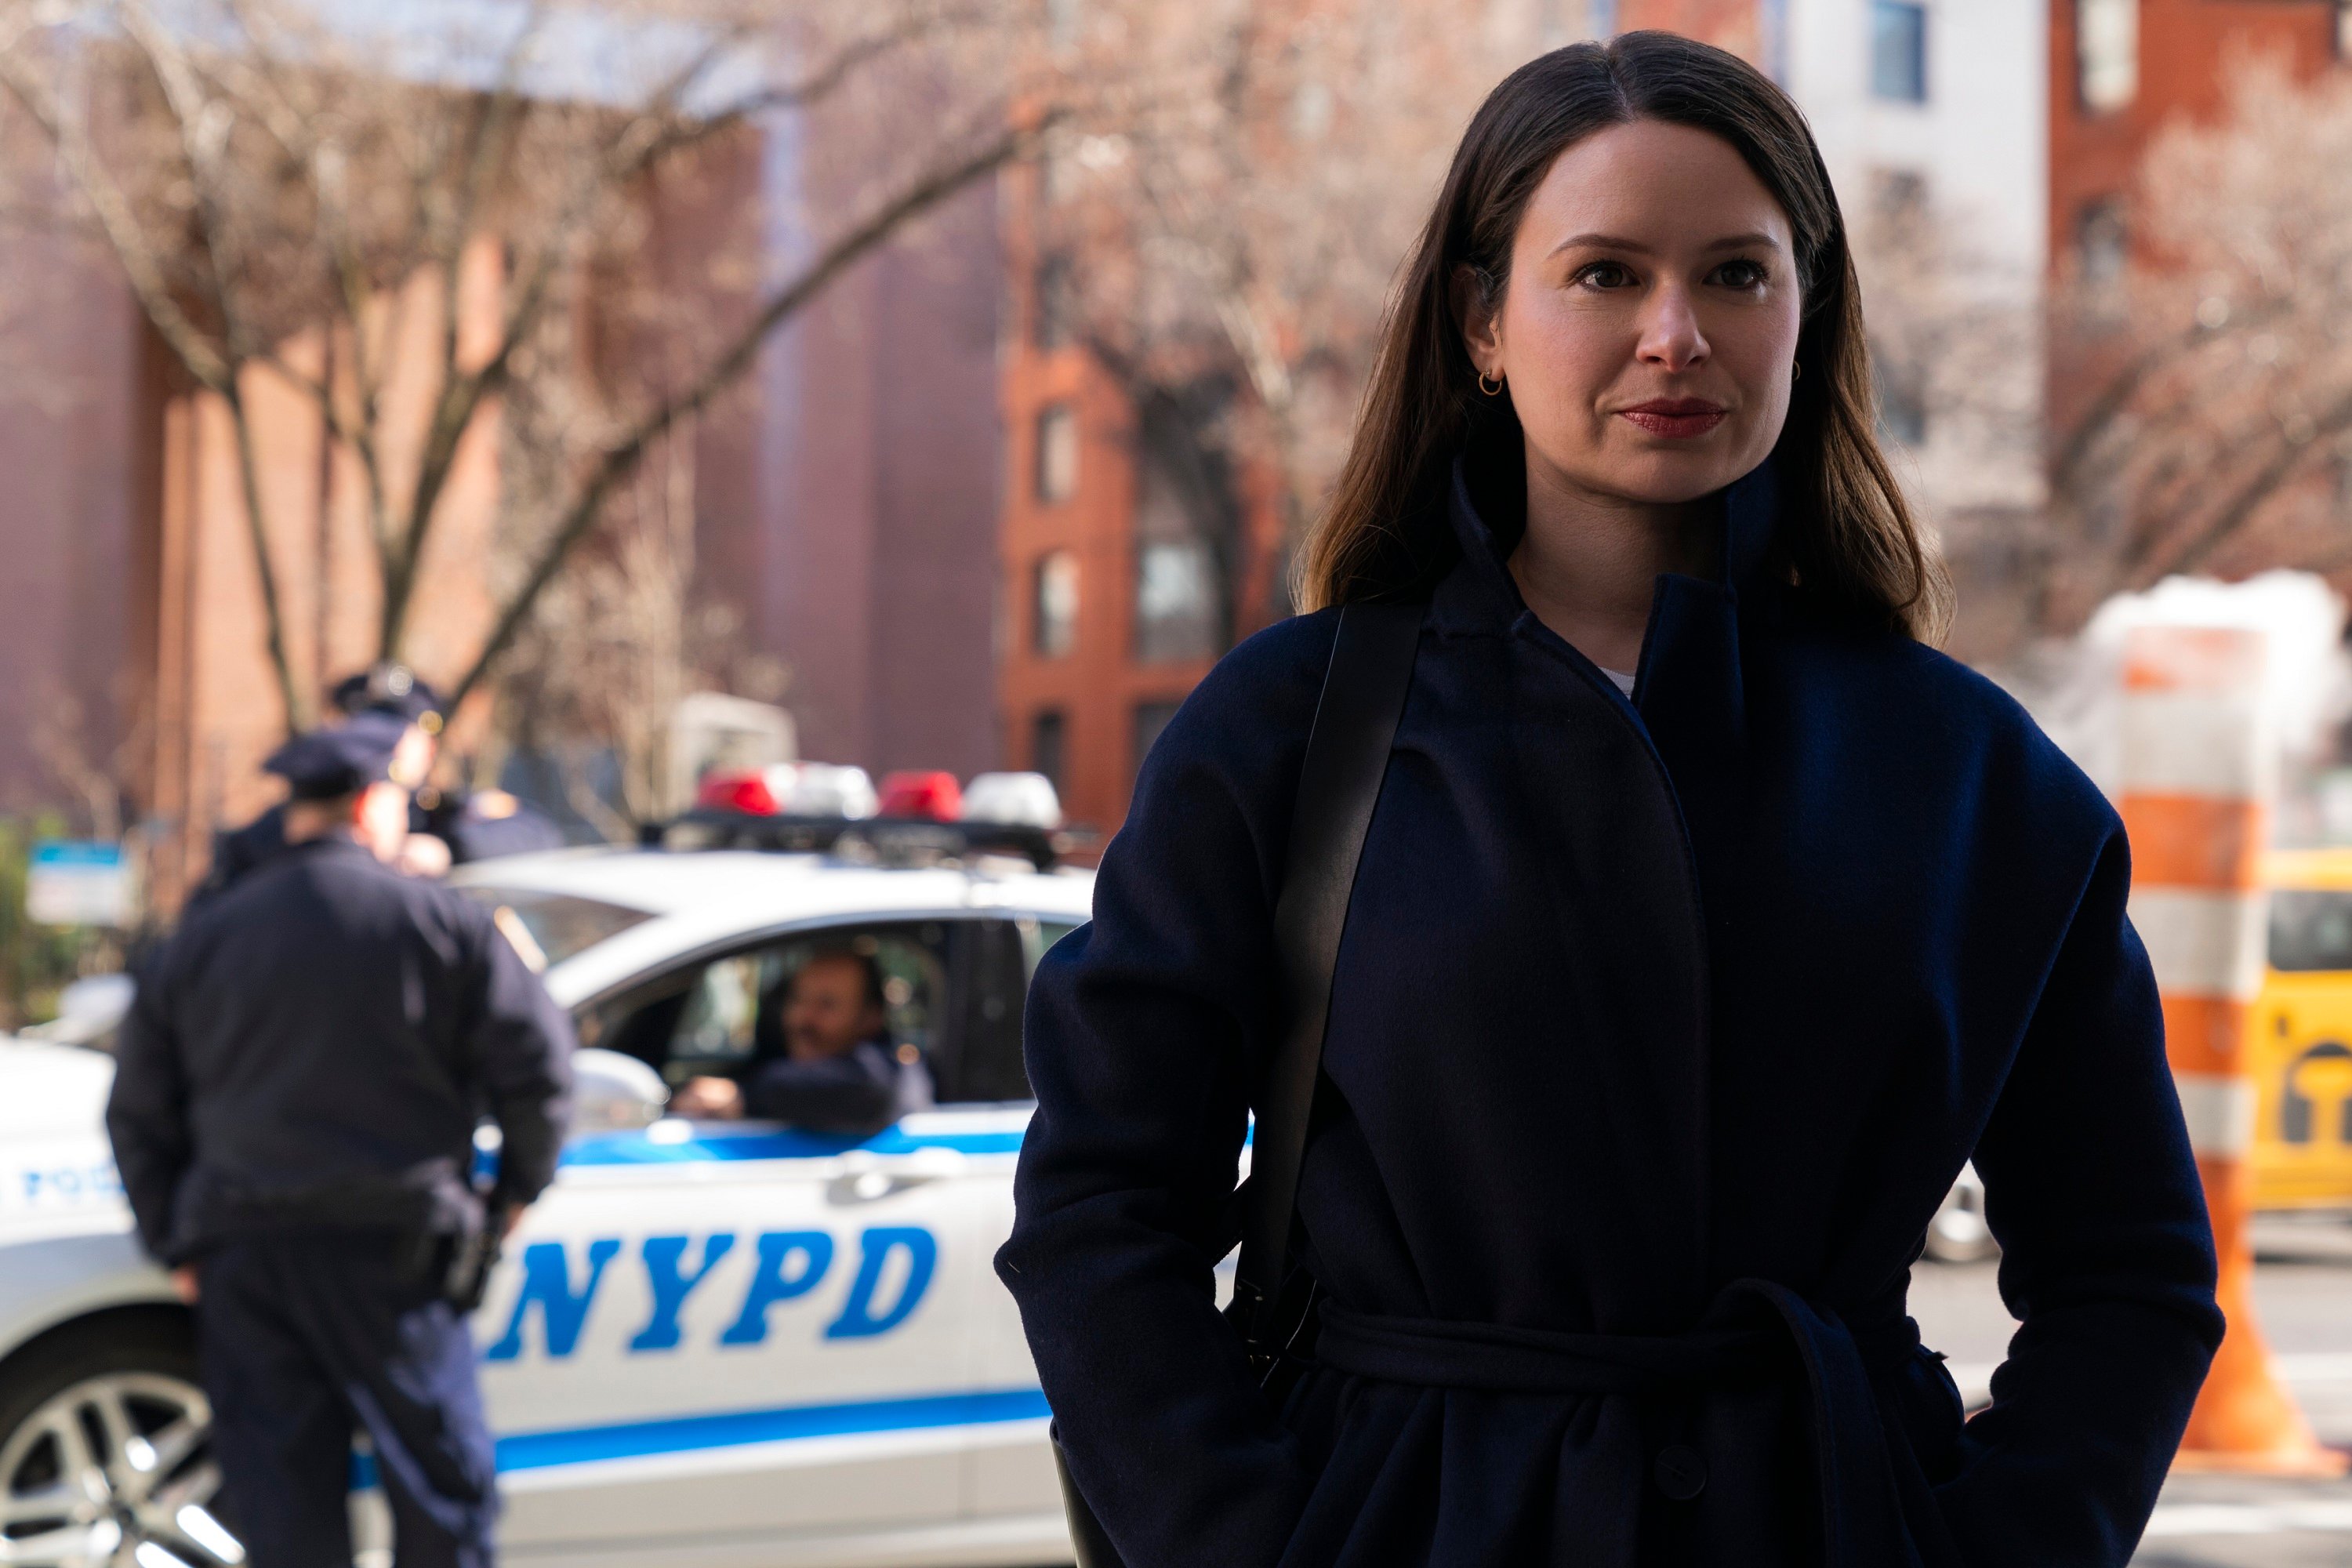 'Inventing Anna' Katie Lowes as Rachel Williams standing in front of a police car